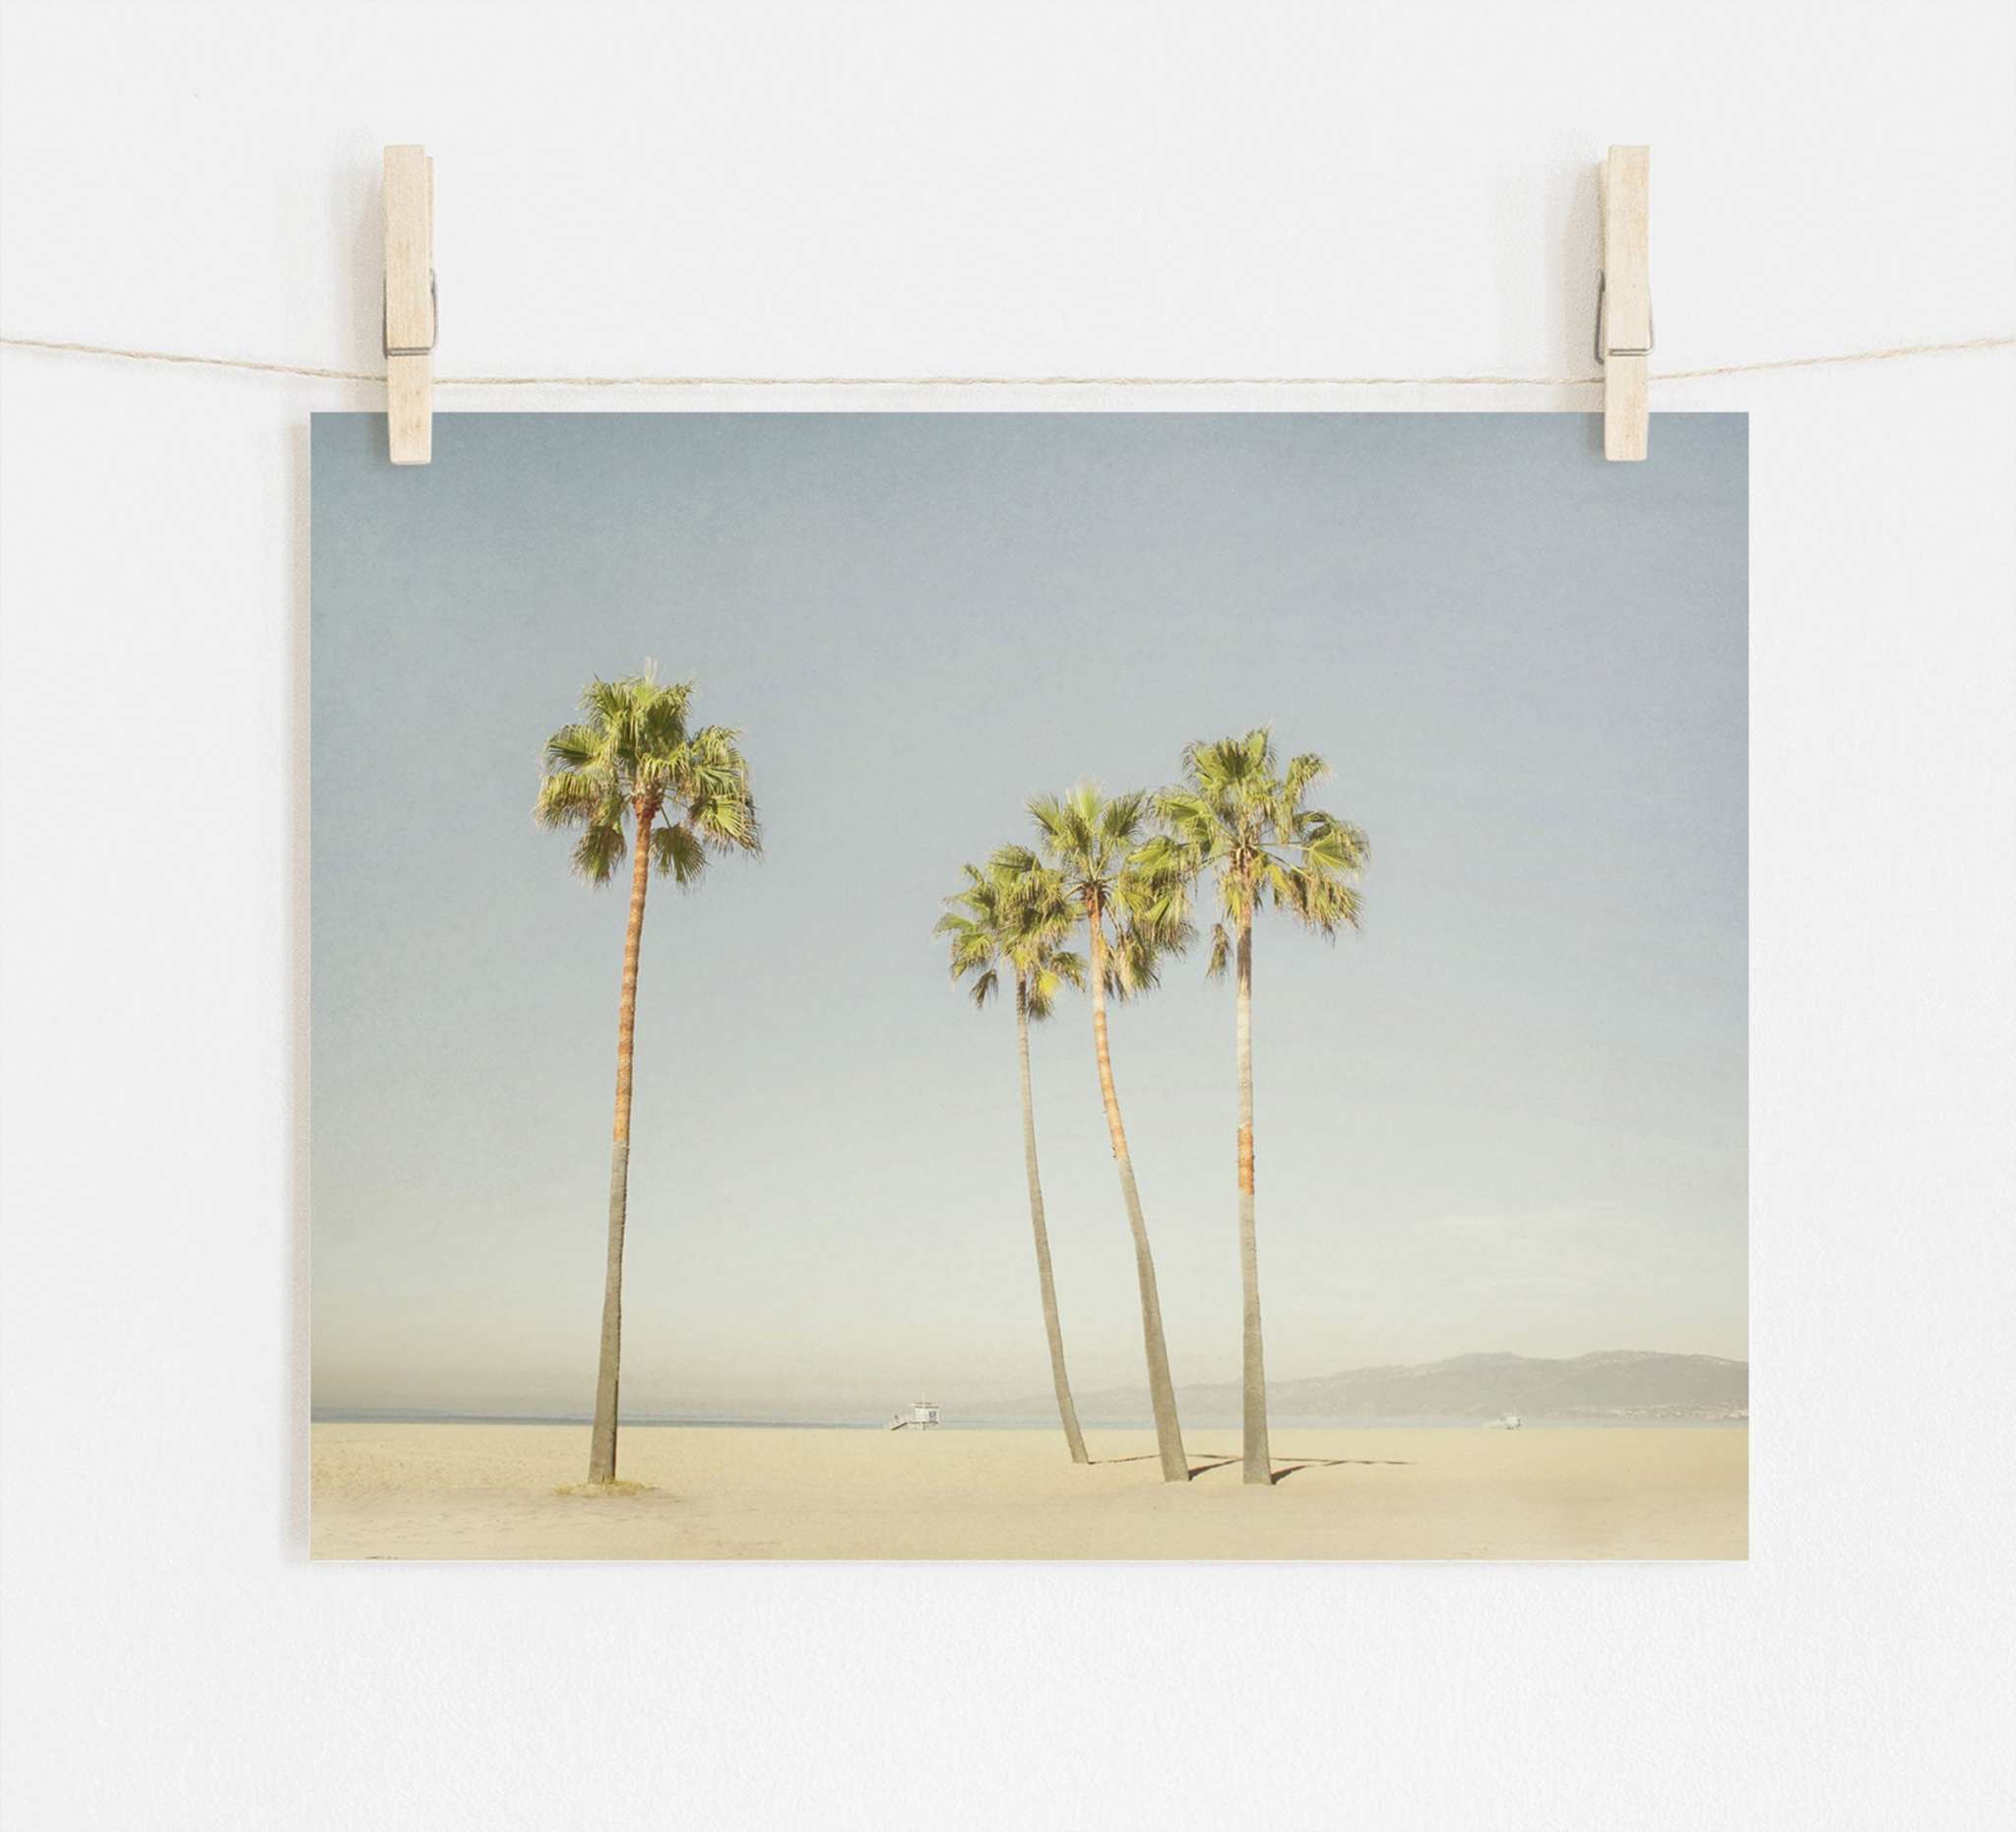 Photo of a picturesque California Beach Palm Tree Print, 'Boardwalk Palms' with five palm trees on archival photographic paper, pegged by wooden clothespins to a string against a white wall. Brand Name: Offley Green